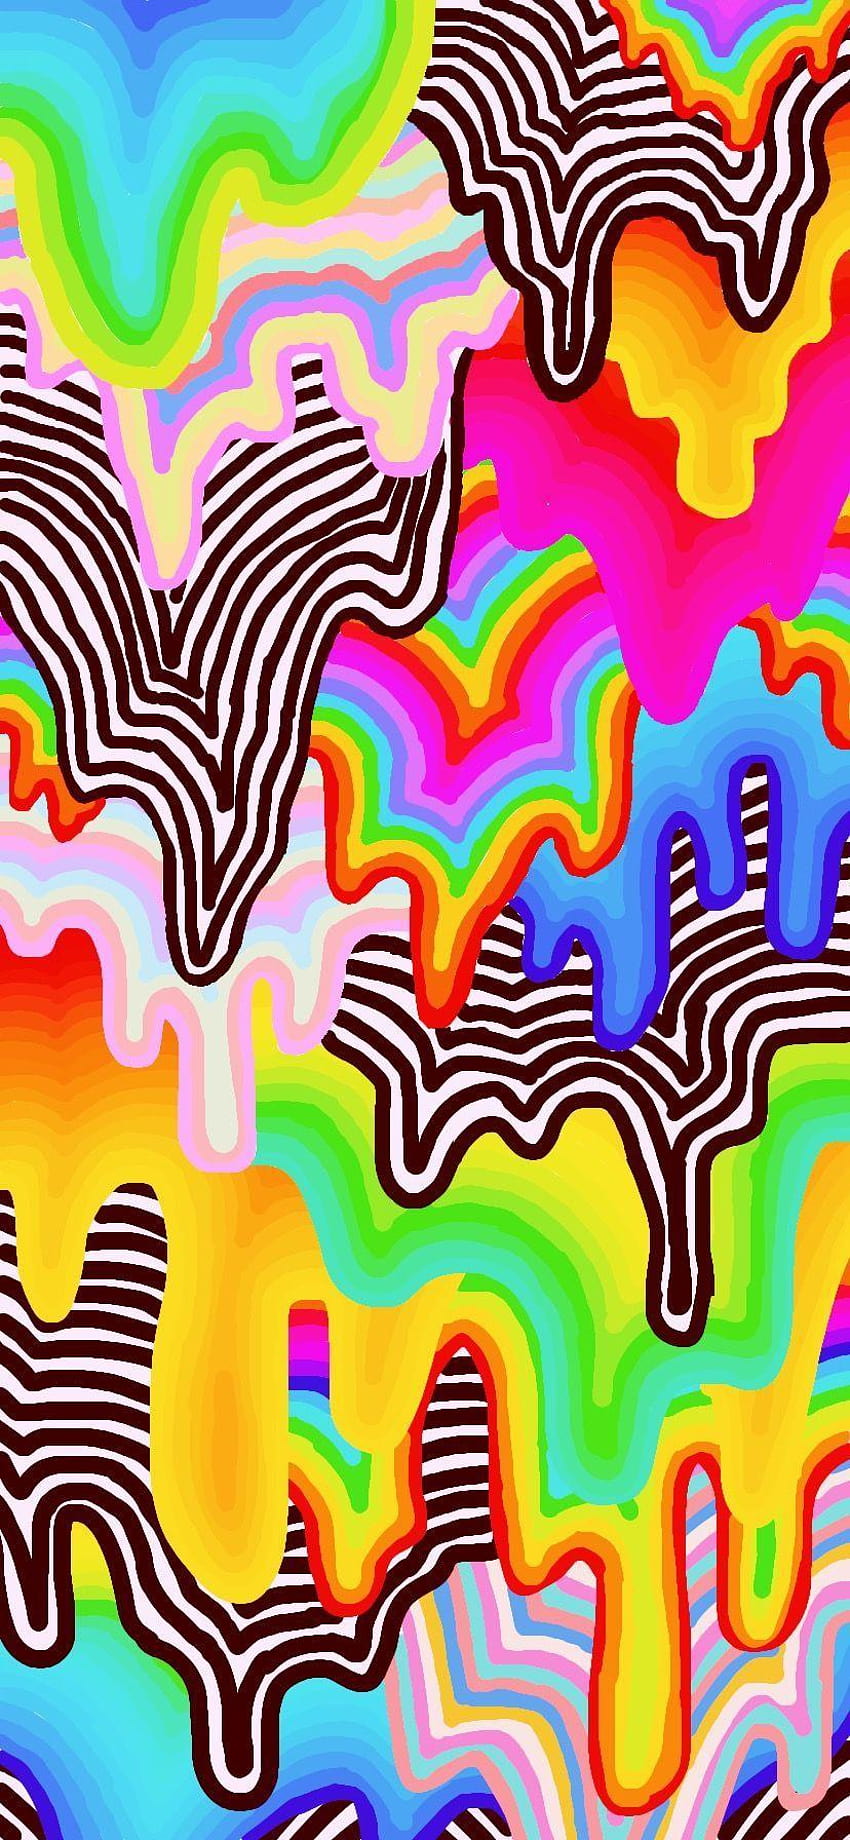 This is a colorful and artistic wallpaper with abstract patterns. - VSCO